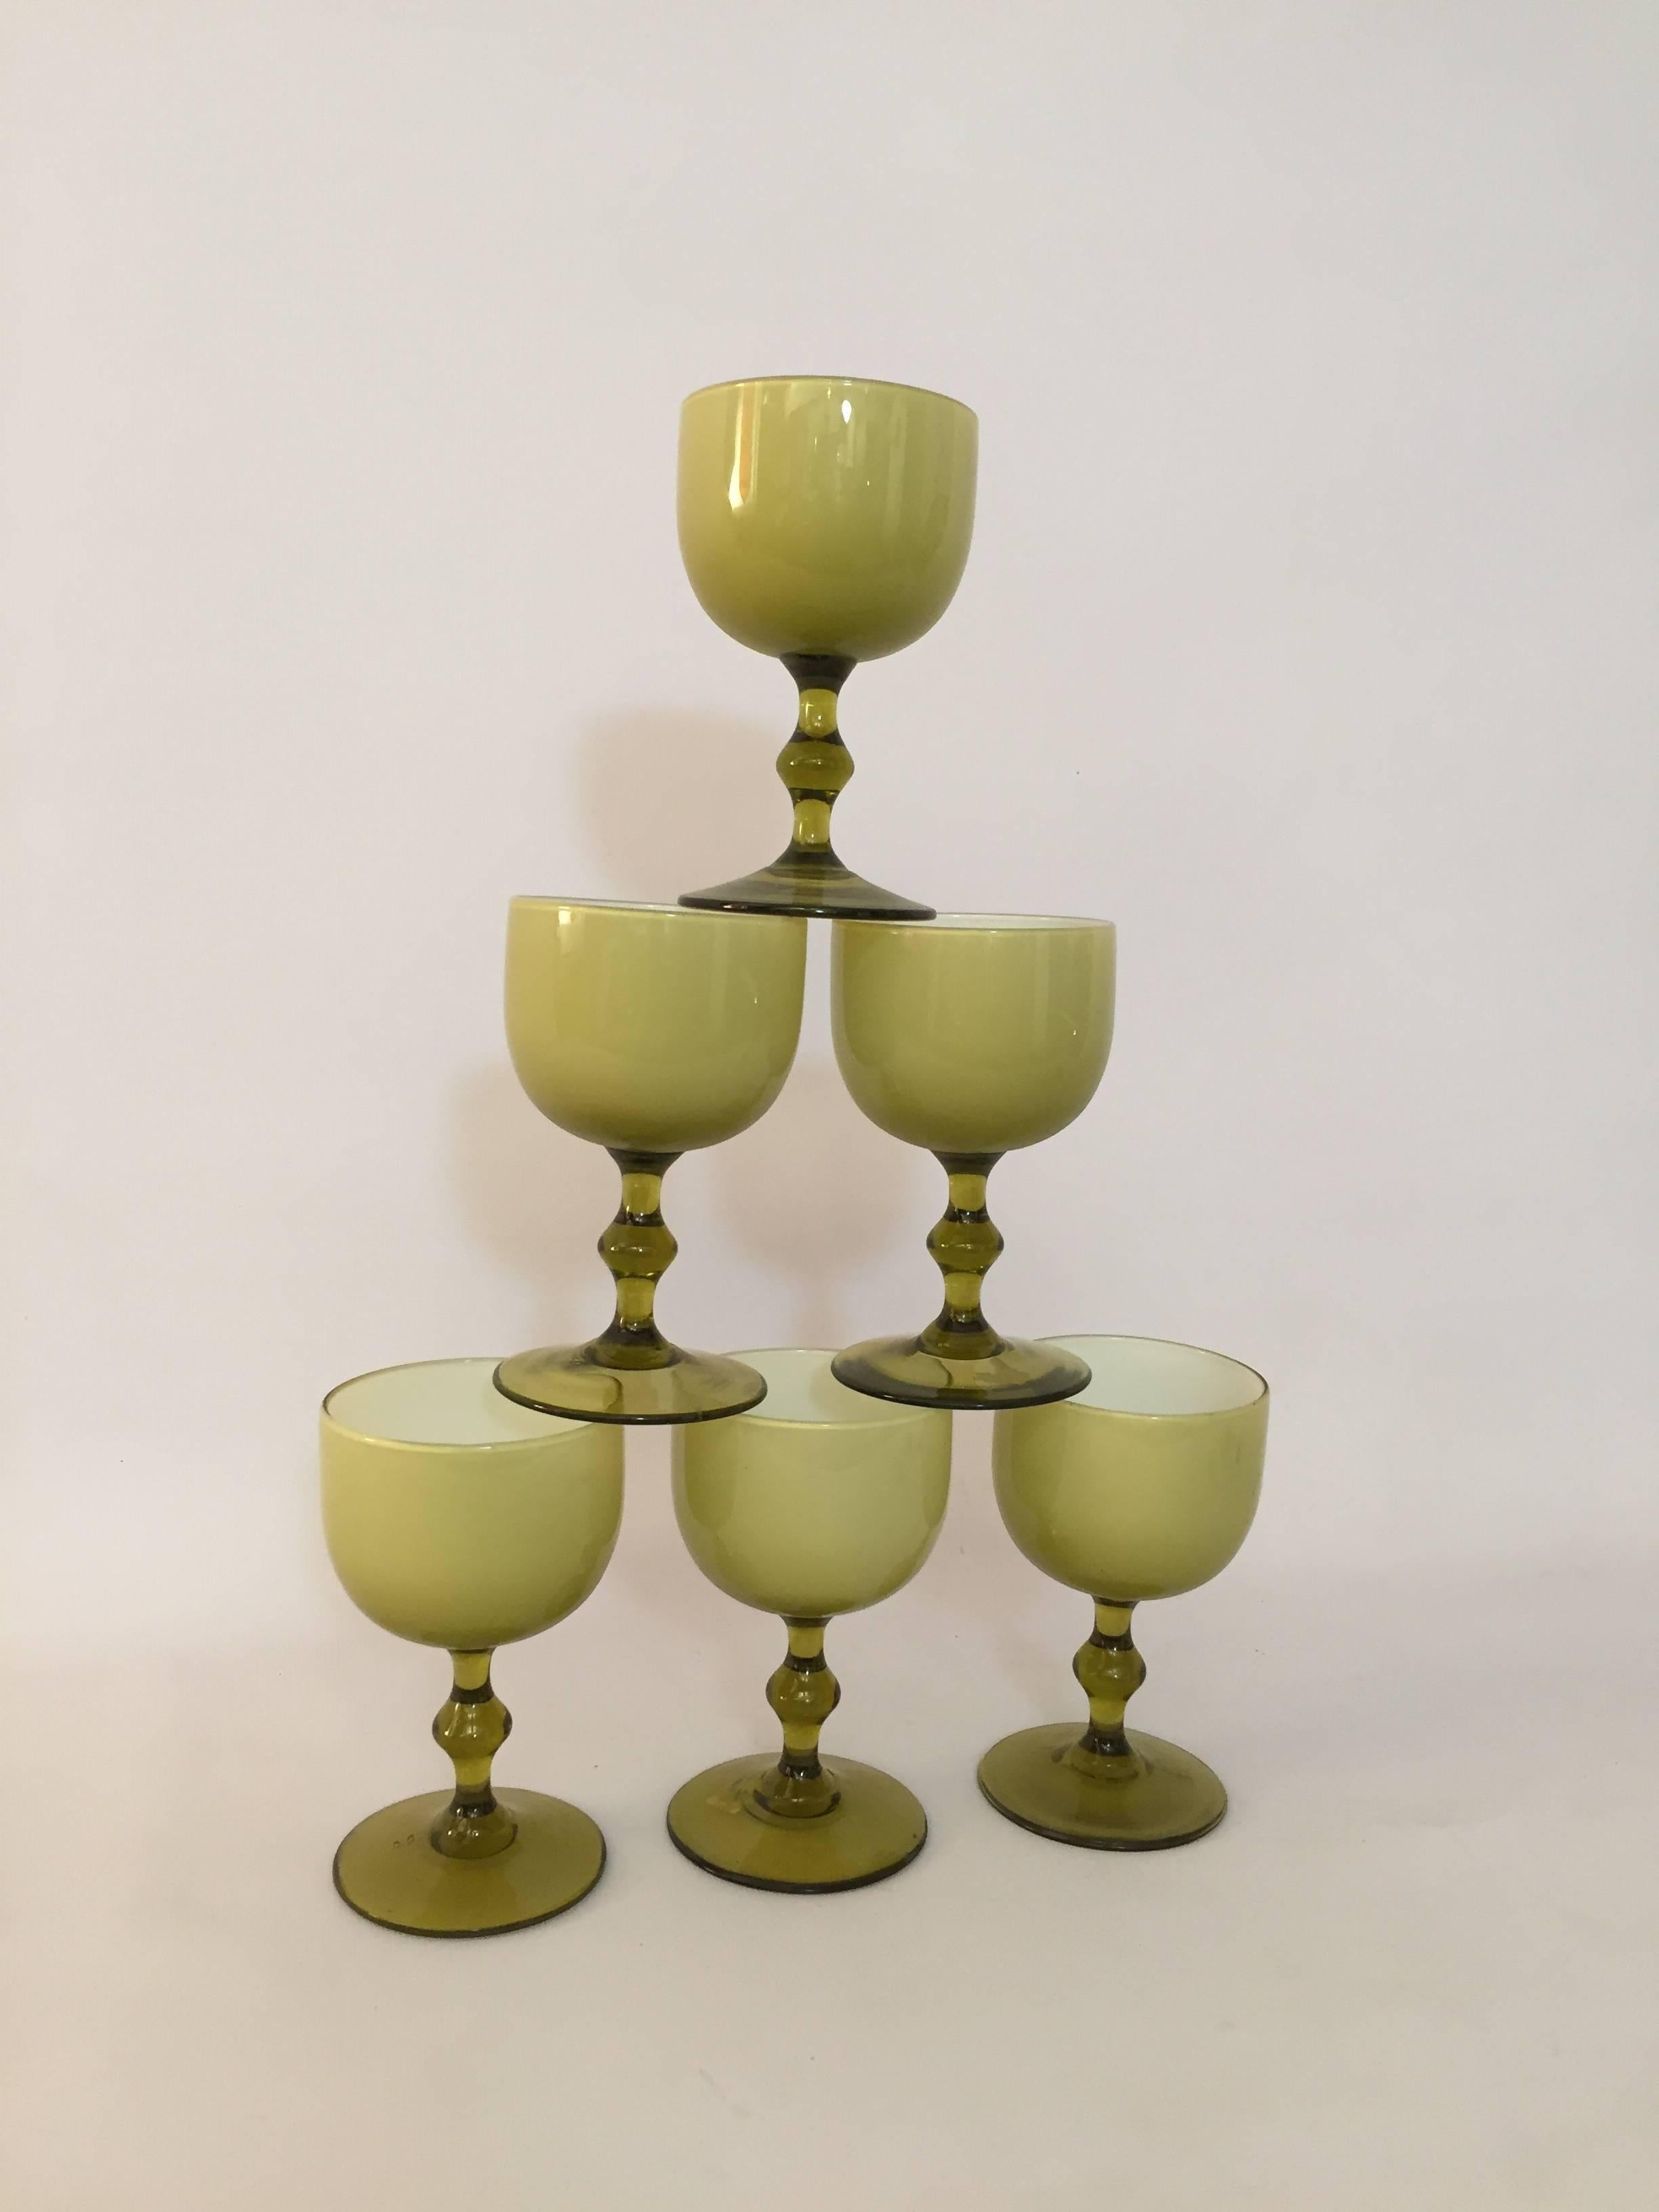 Six cased glass wine goblets designed by Carlo Moretti. These have never been used and some even retain their 